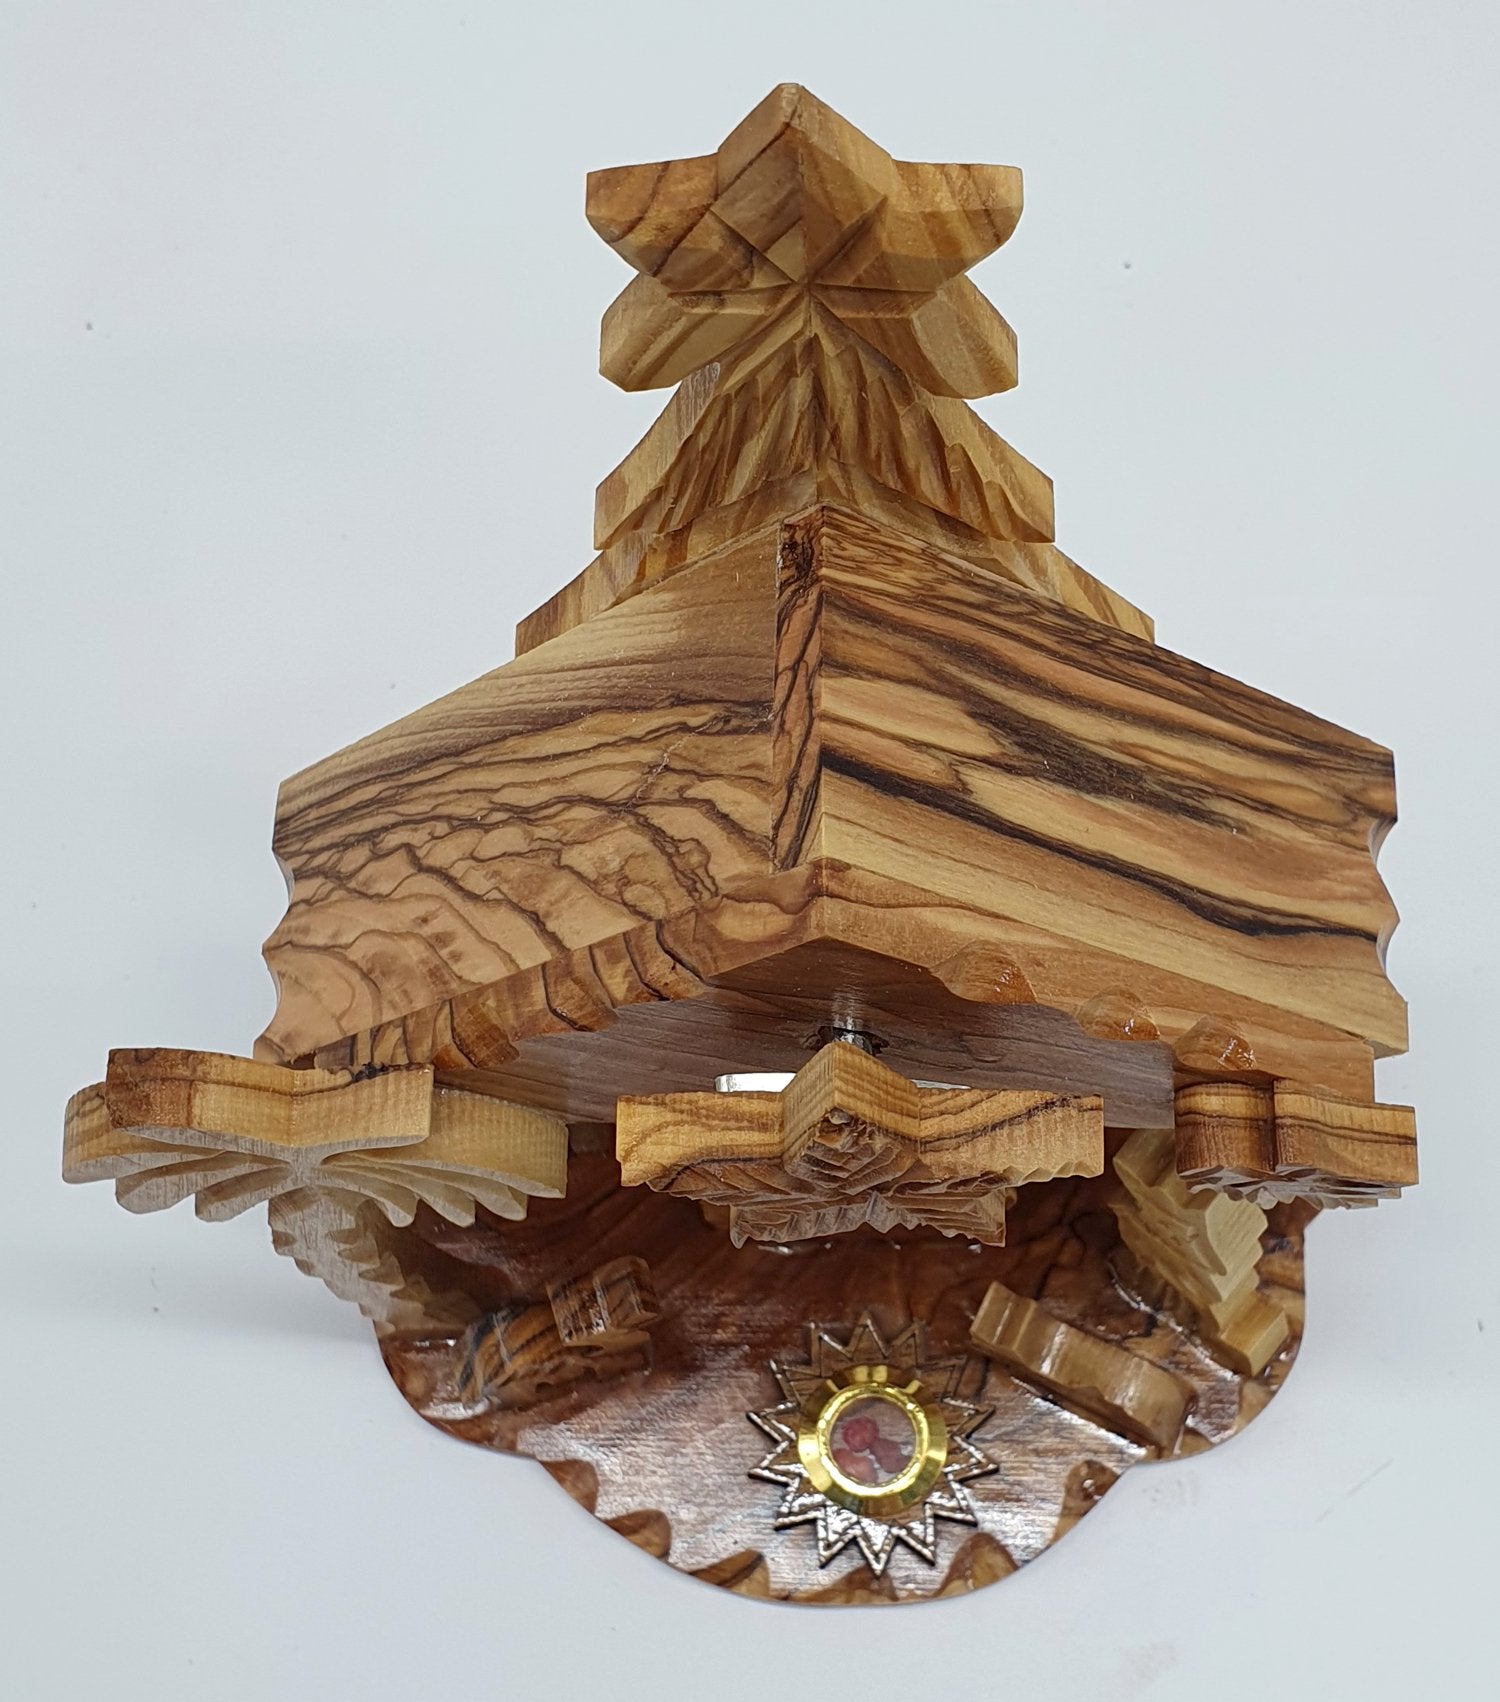 Zuluf Hand-Carved Nativity Set Scene with Bark Roof - Made In Bethlehem 8.4" REWRITE this tittle and make it sew optimized and add relevant high search keywords - Zuluf